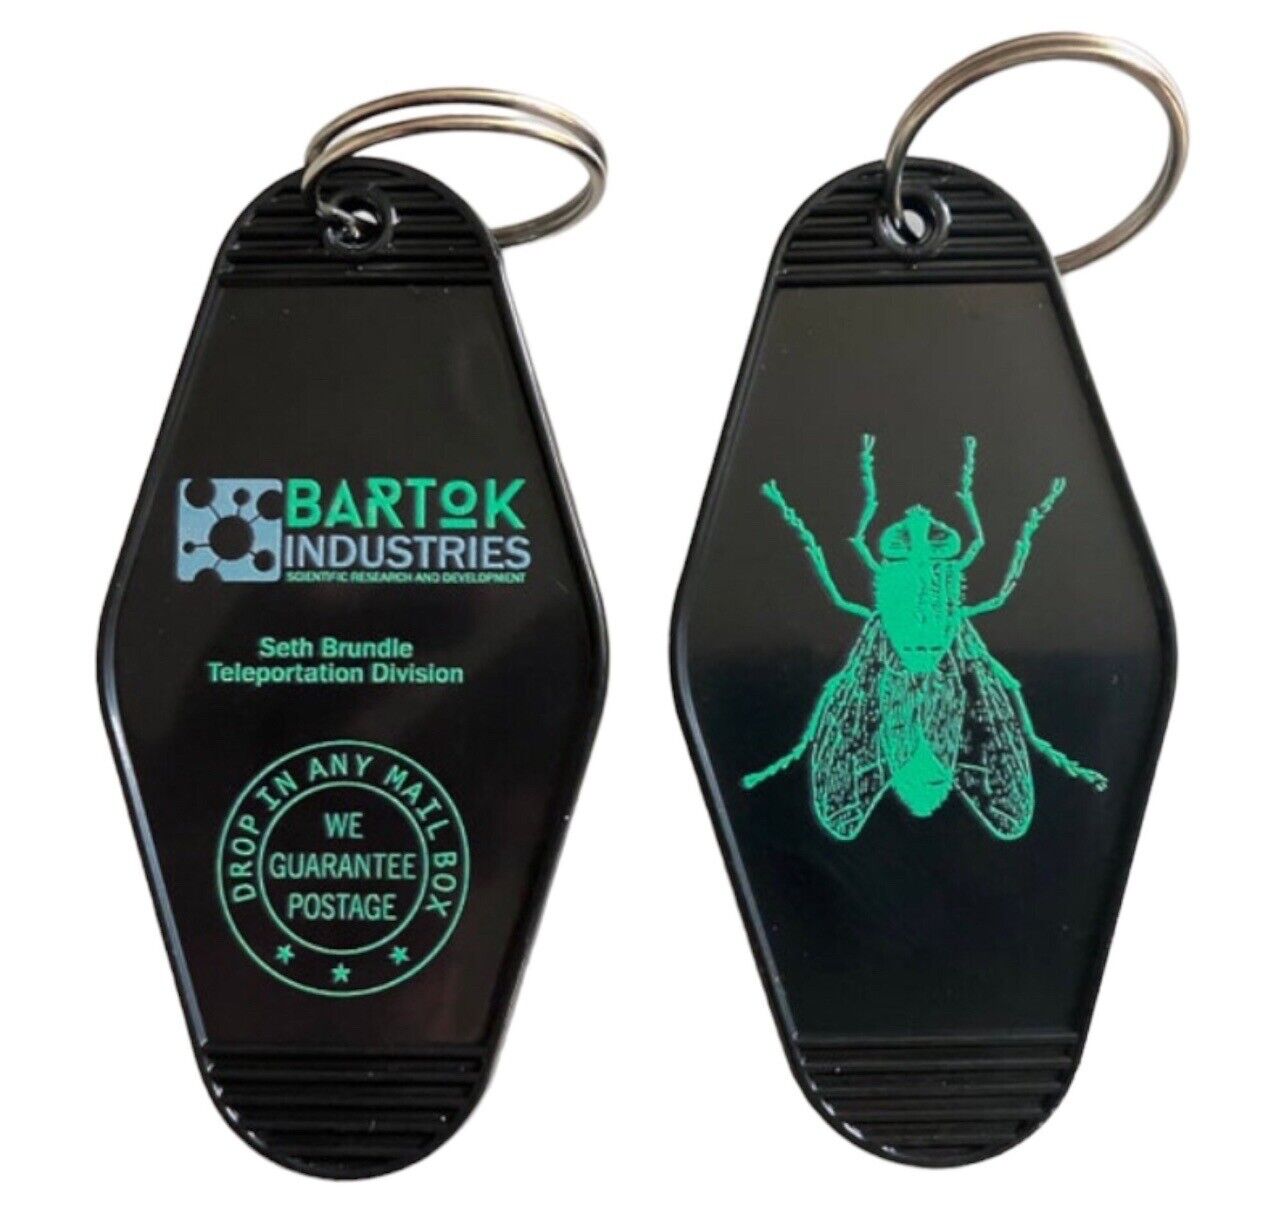 THE FLY inspired Bartok Industries Keytag